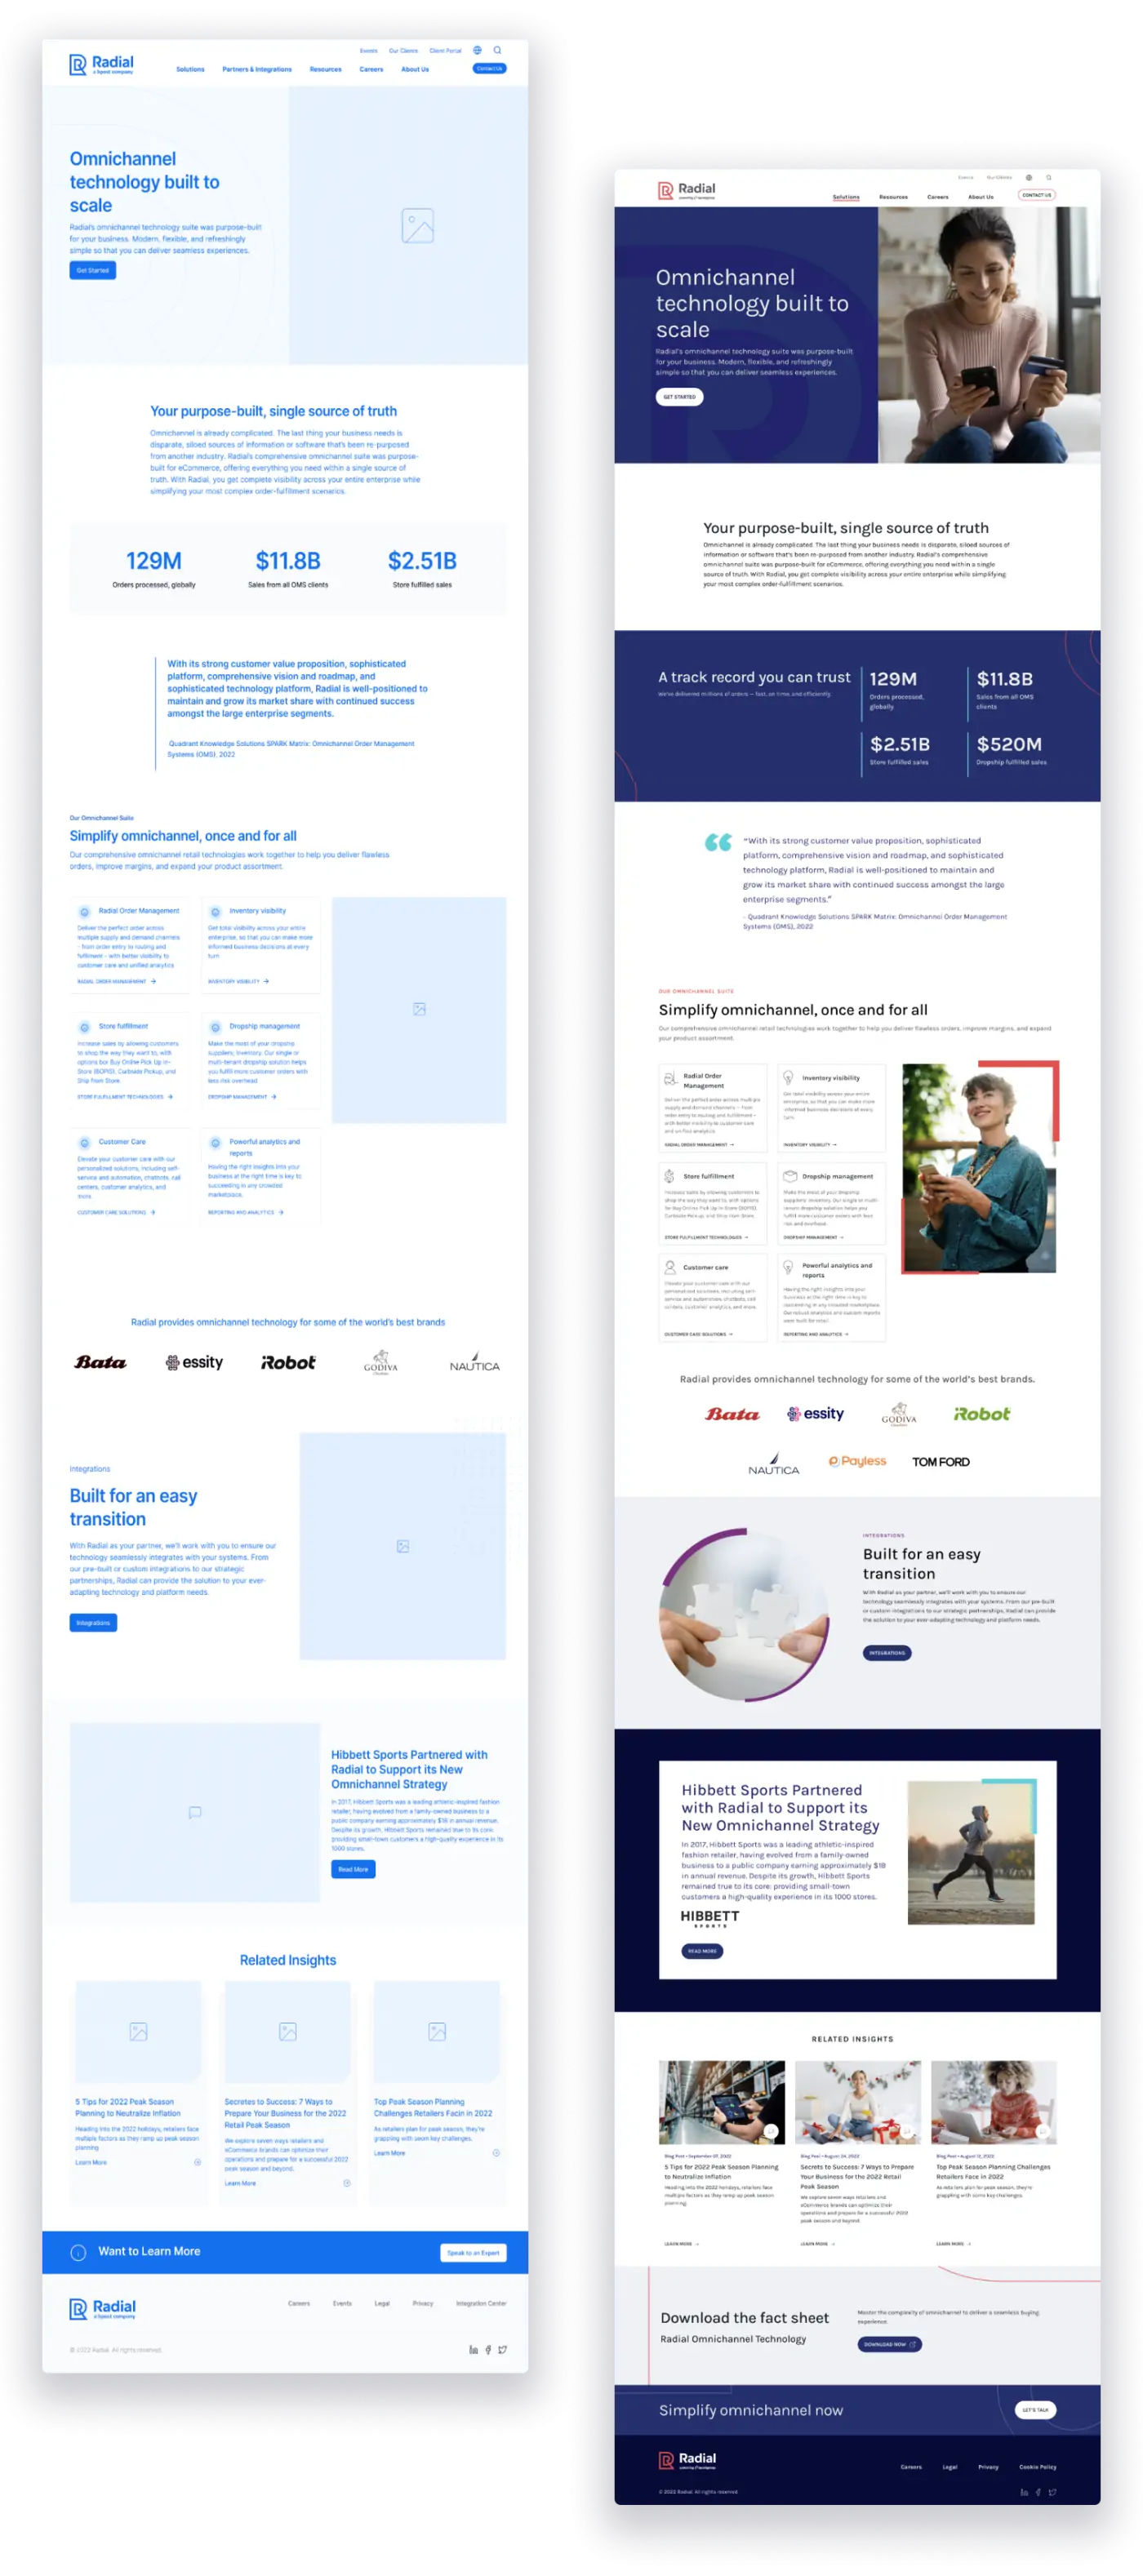 from wireframe on the left to website design on the right